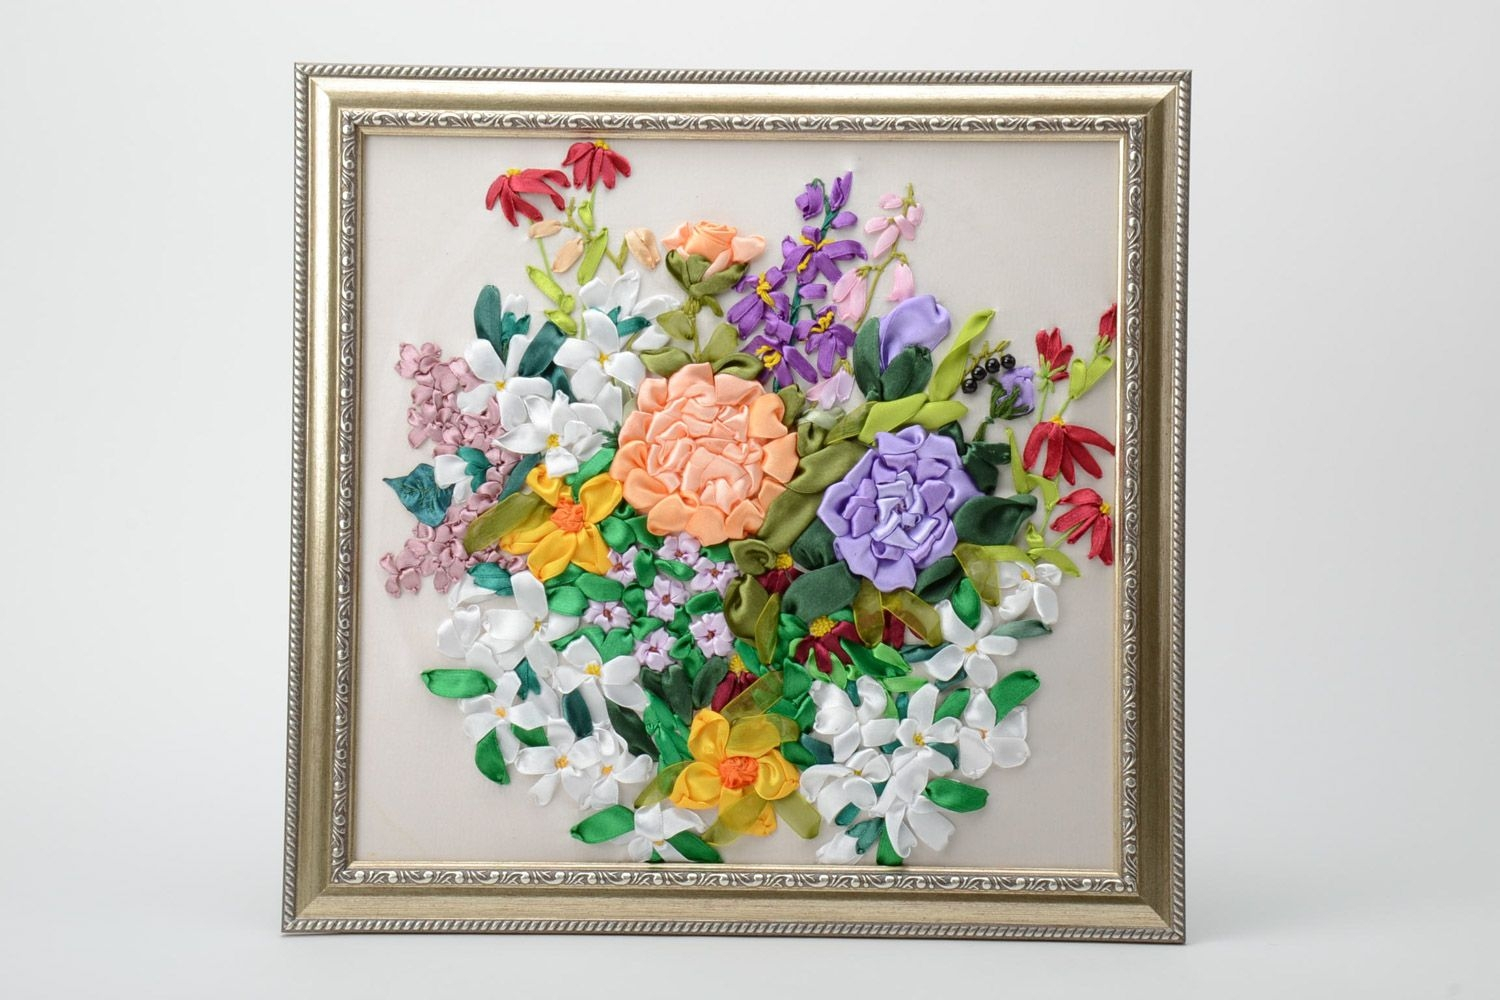 Ribbon Embroidery Flowers Patterns Handmade Square Picture With Satin Ribbon Embroidered Flowers In Frame